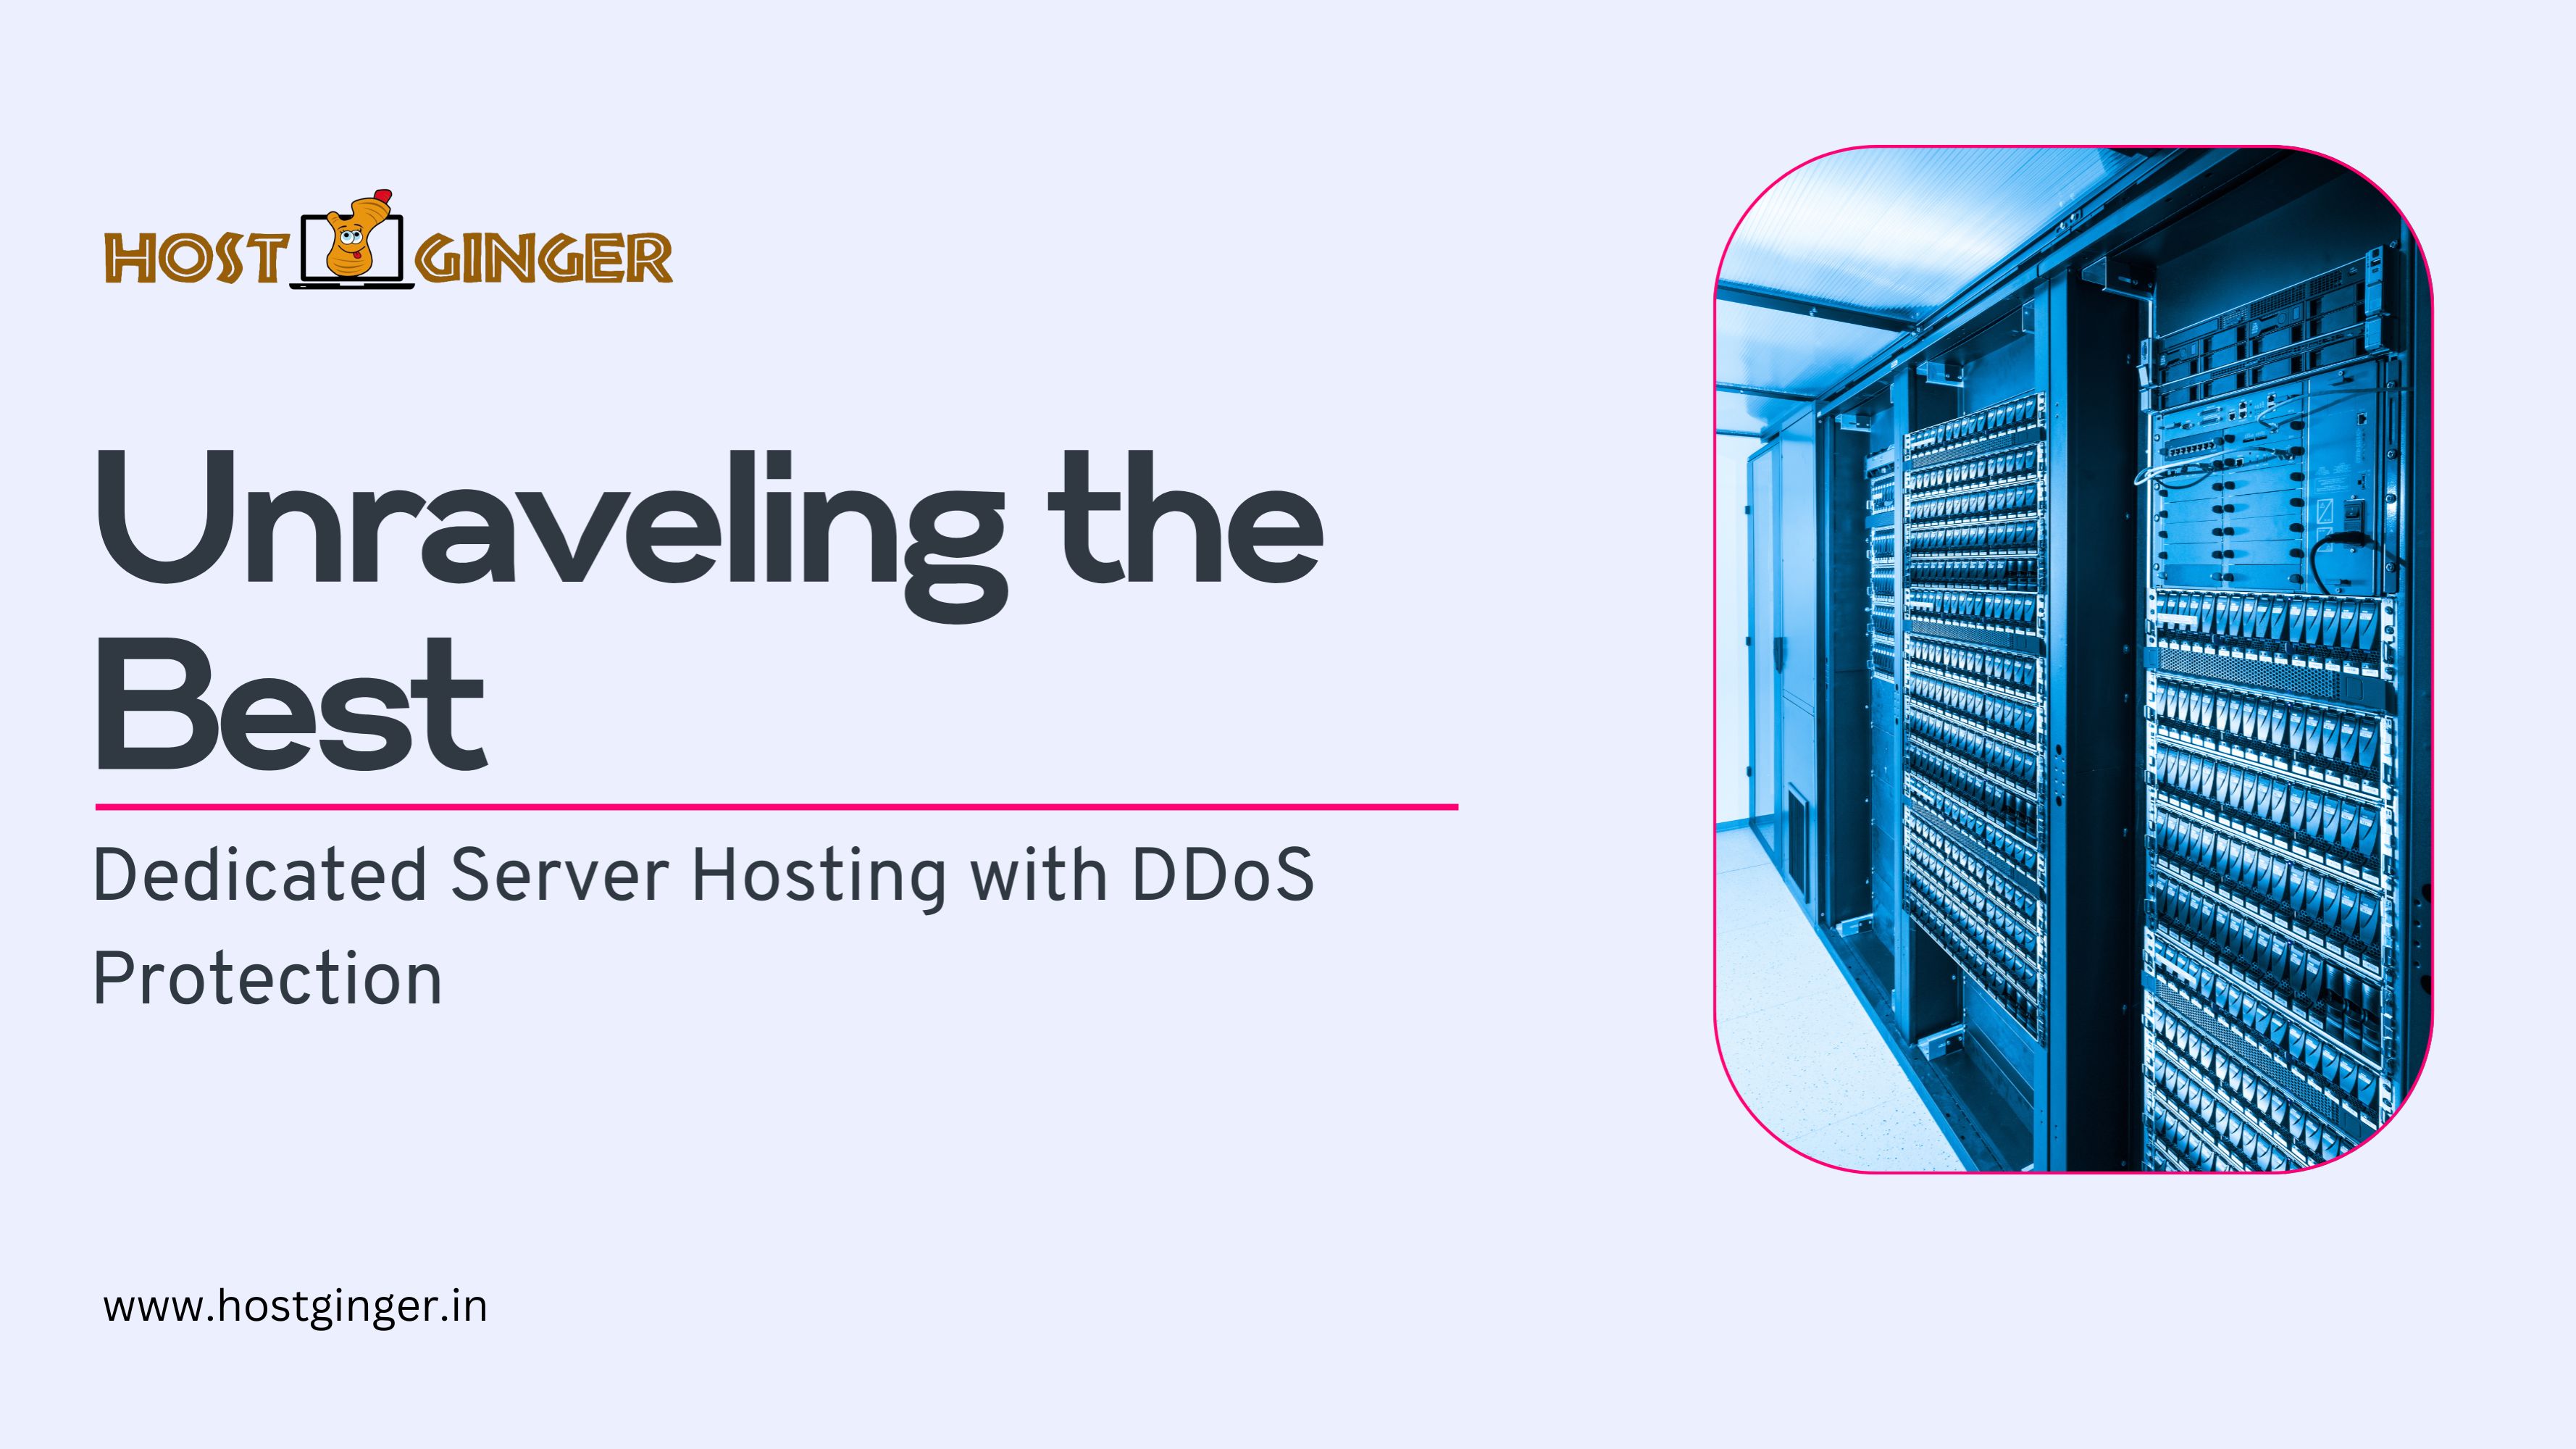 Dedicated Server Hosting with DDoS Protection